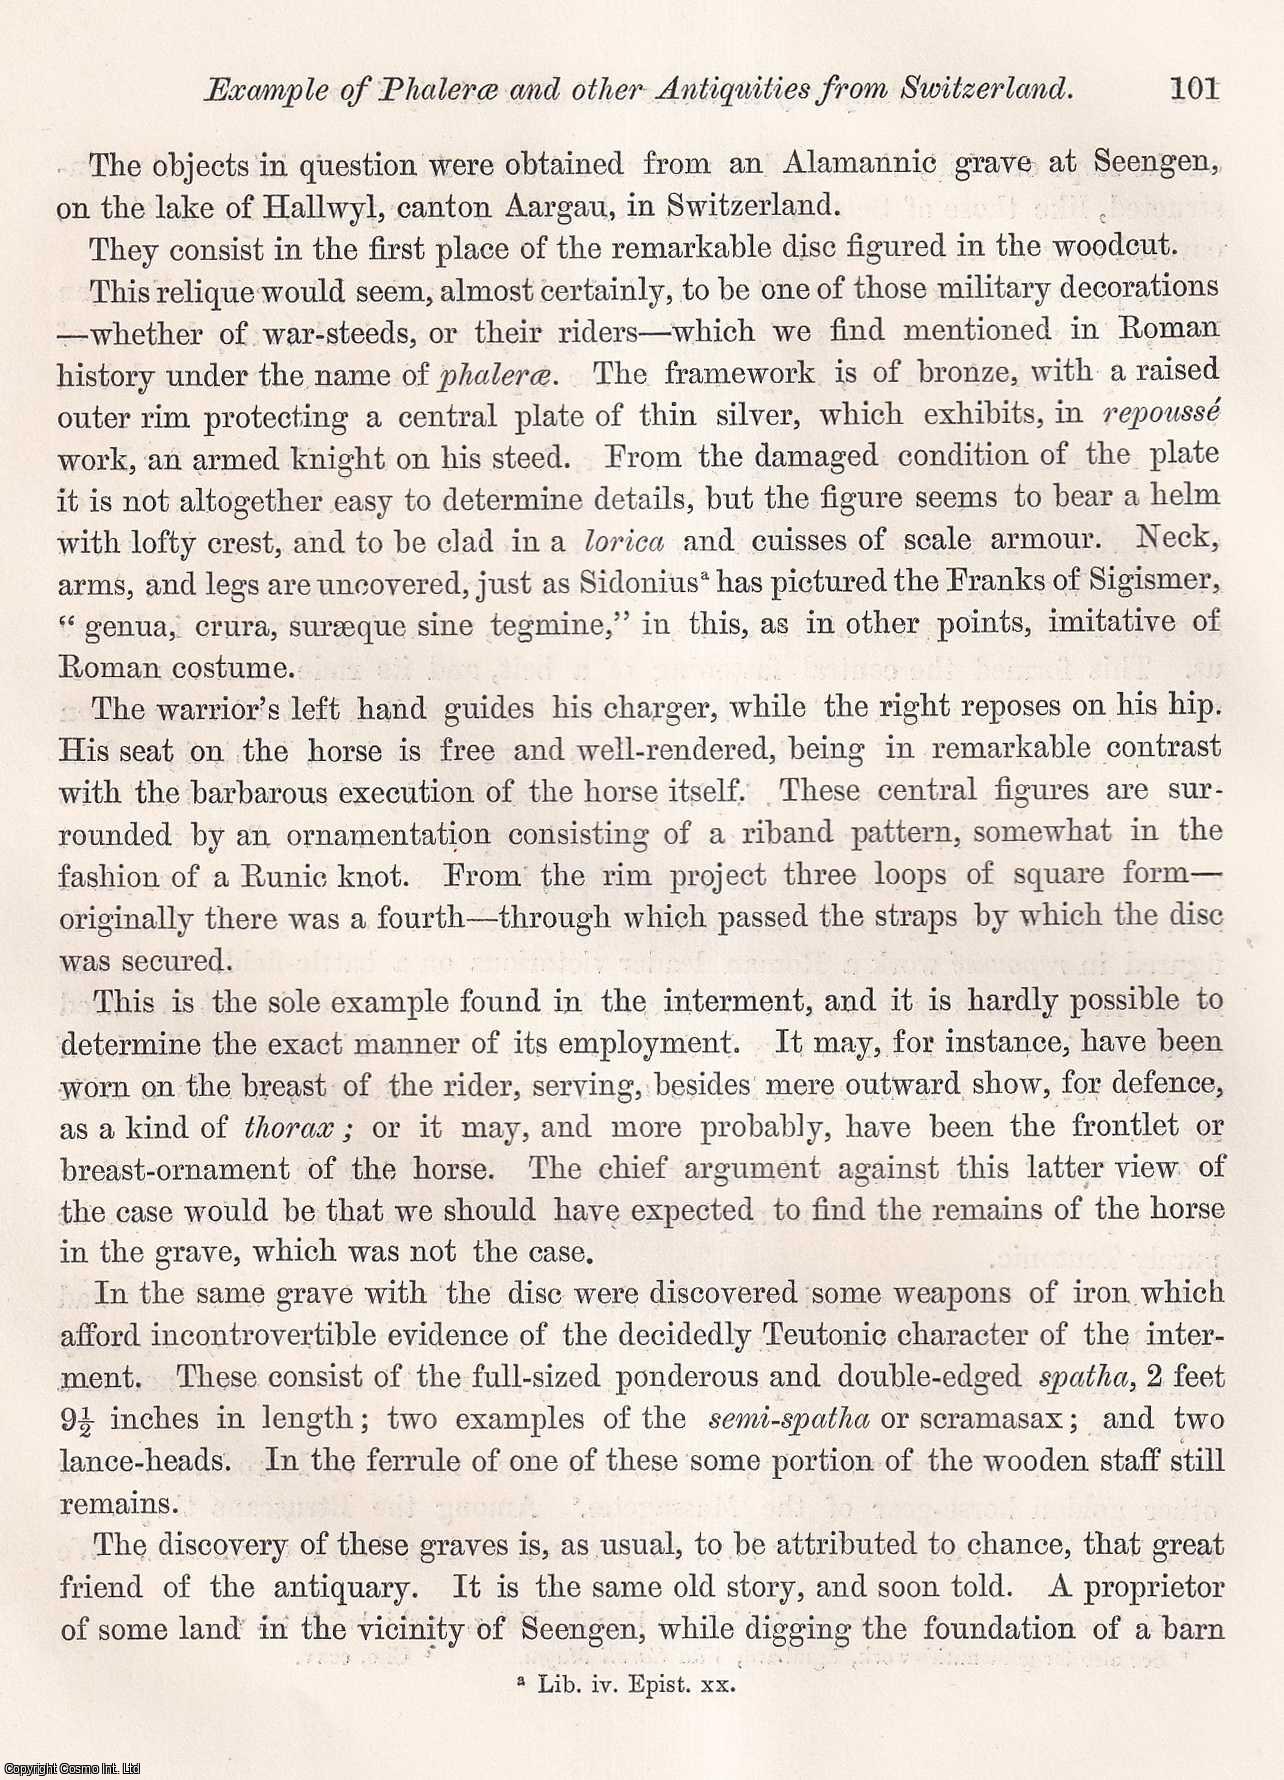 William Michael Wylie, Esq., F.S.A. (Communicated by) - On an example of Phalerae and other Antiquities from Switzerland. An uncommon original article from the journal Archaeologia, 1873.